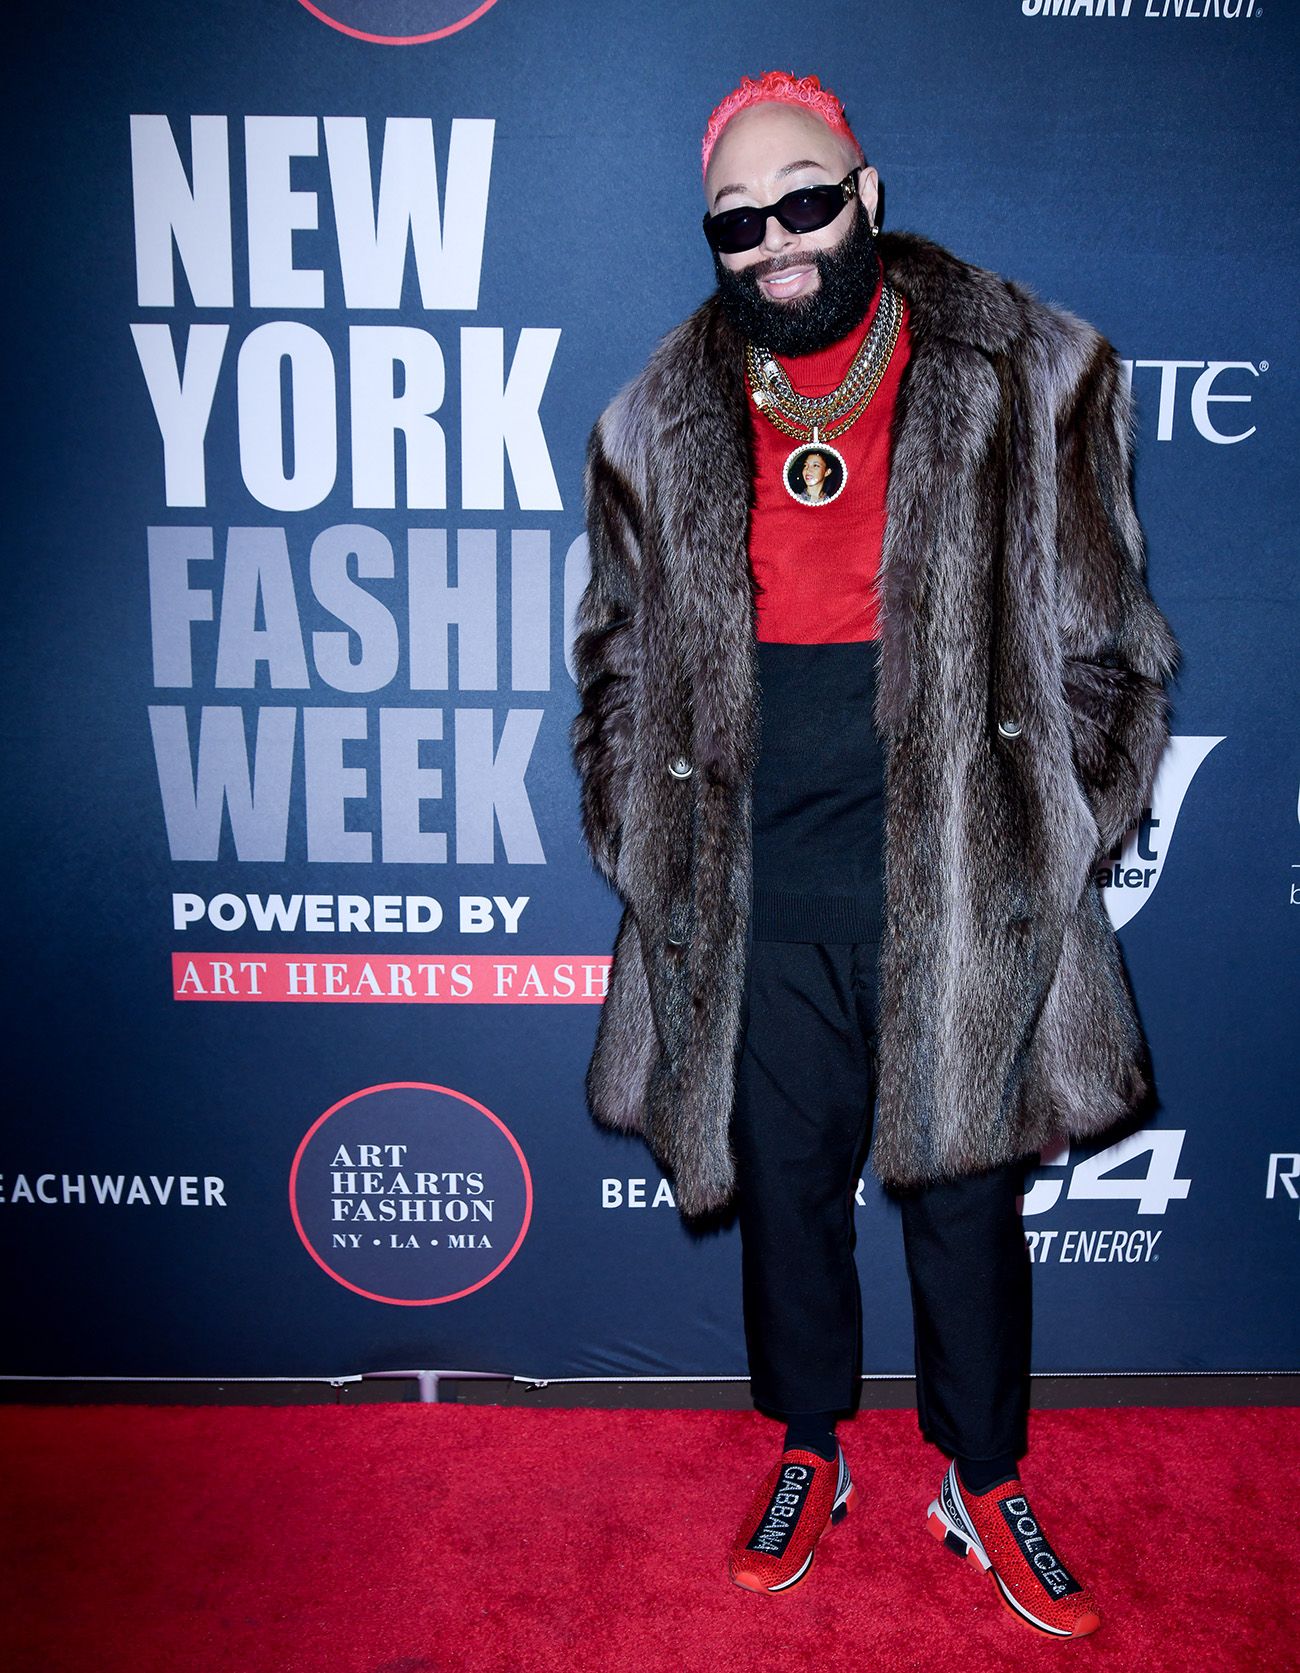 NEW YORK, NEW YORK - FEBRUARY 08: Bandit The Rapper arrives on the red carpet during New York Fashion Week Powered by Art Hearts Fashion at The Angel Orensanz Foundation on February 08, 2024 in New York City.  (Photo by Mark Gunter/Getty Images for Art Hearts Fashion)